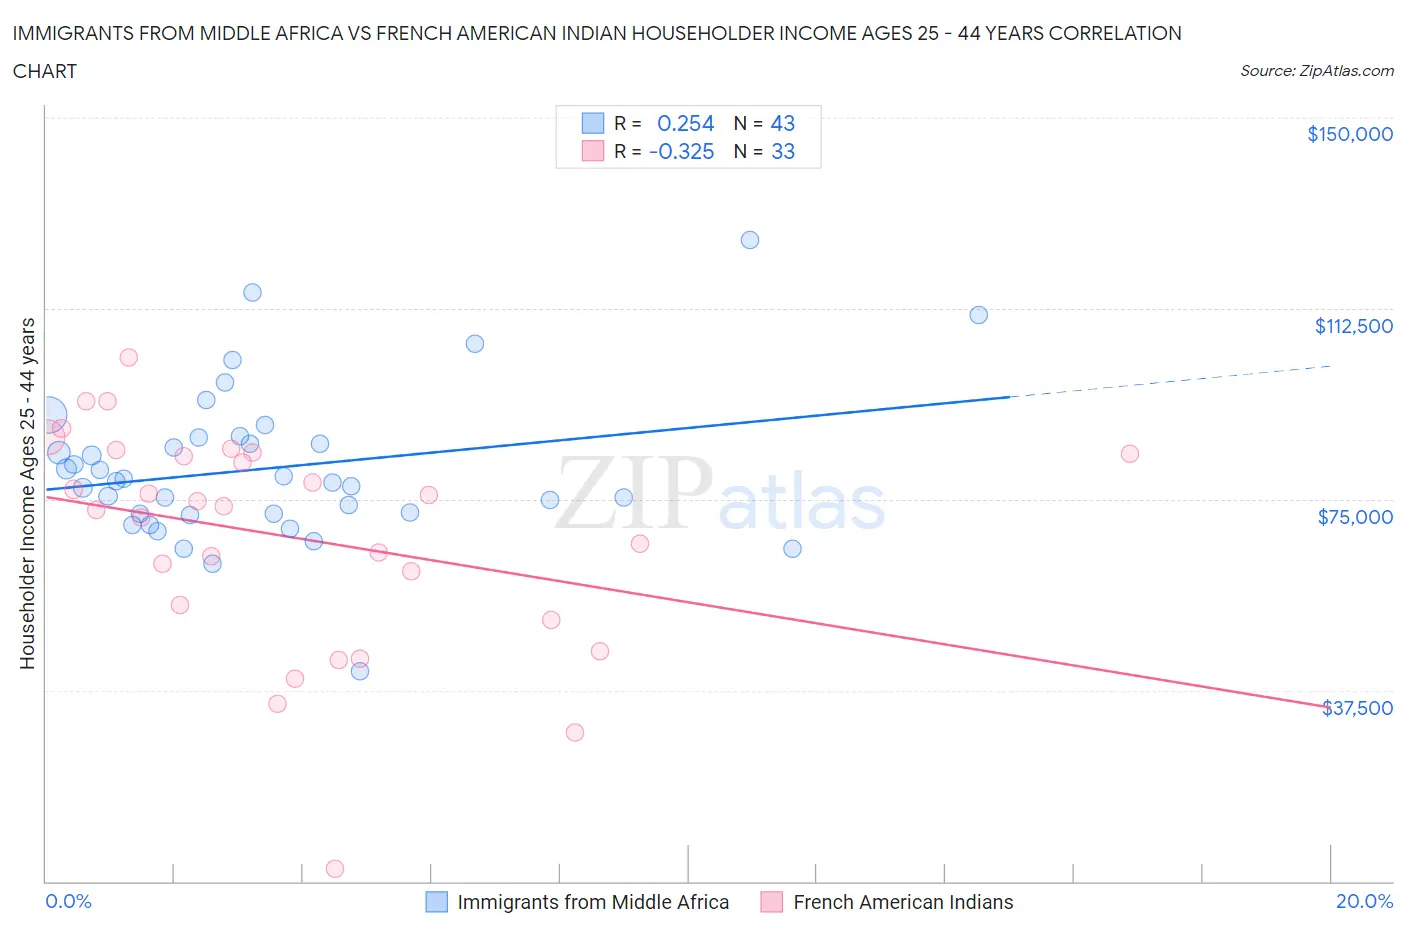 Immigrants from Middle Africa vs French American Indian Householder Income Ages 25 - 44 years